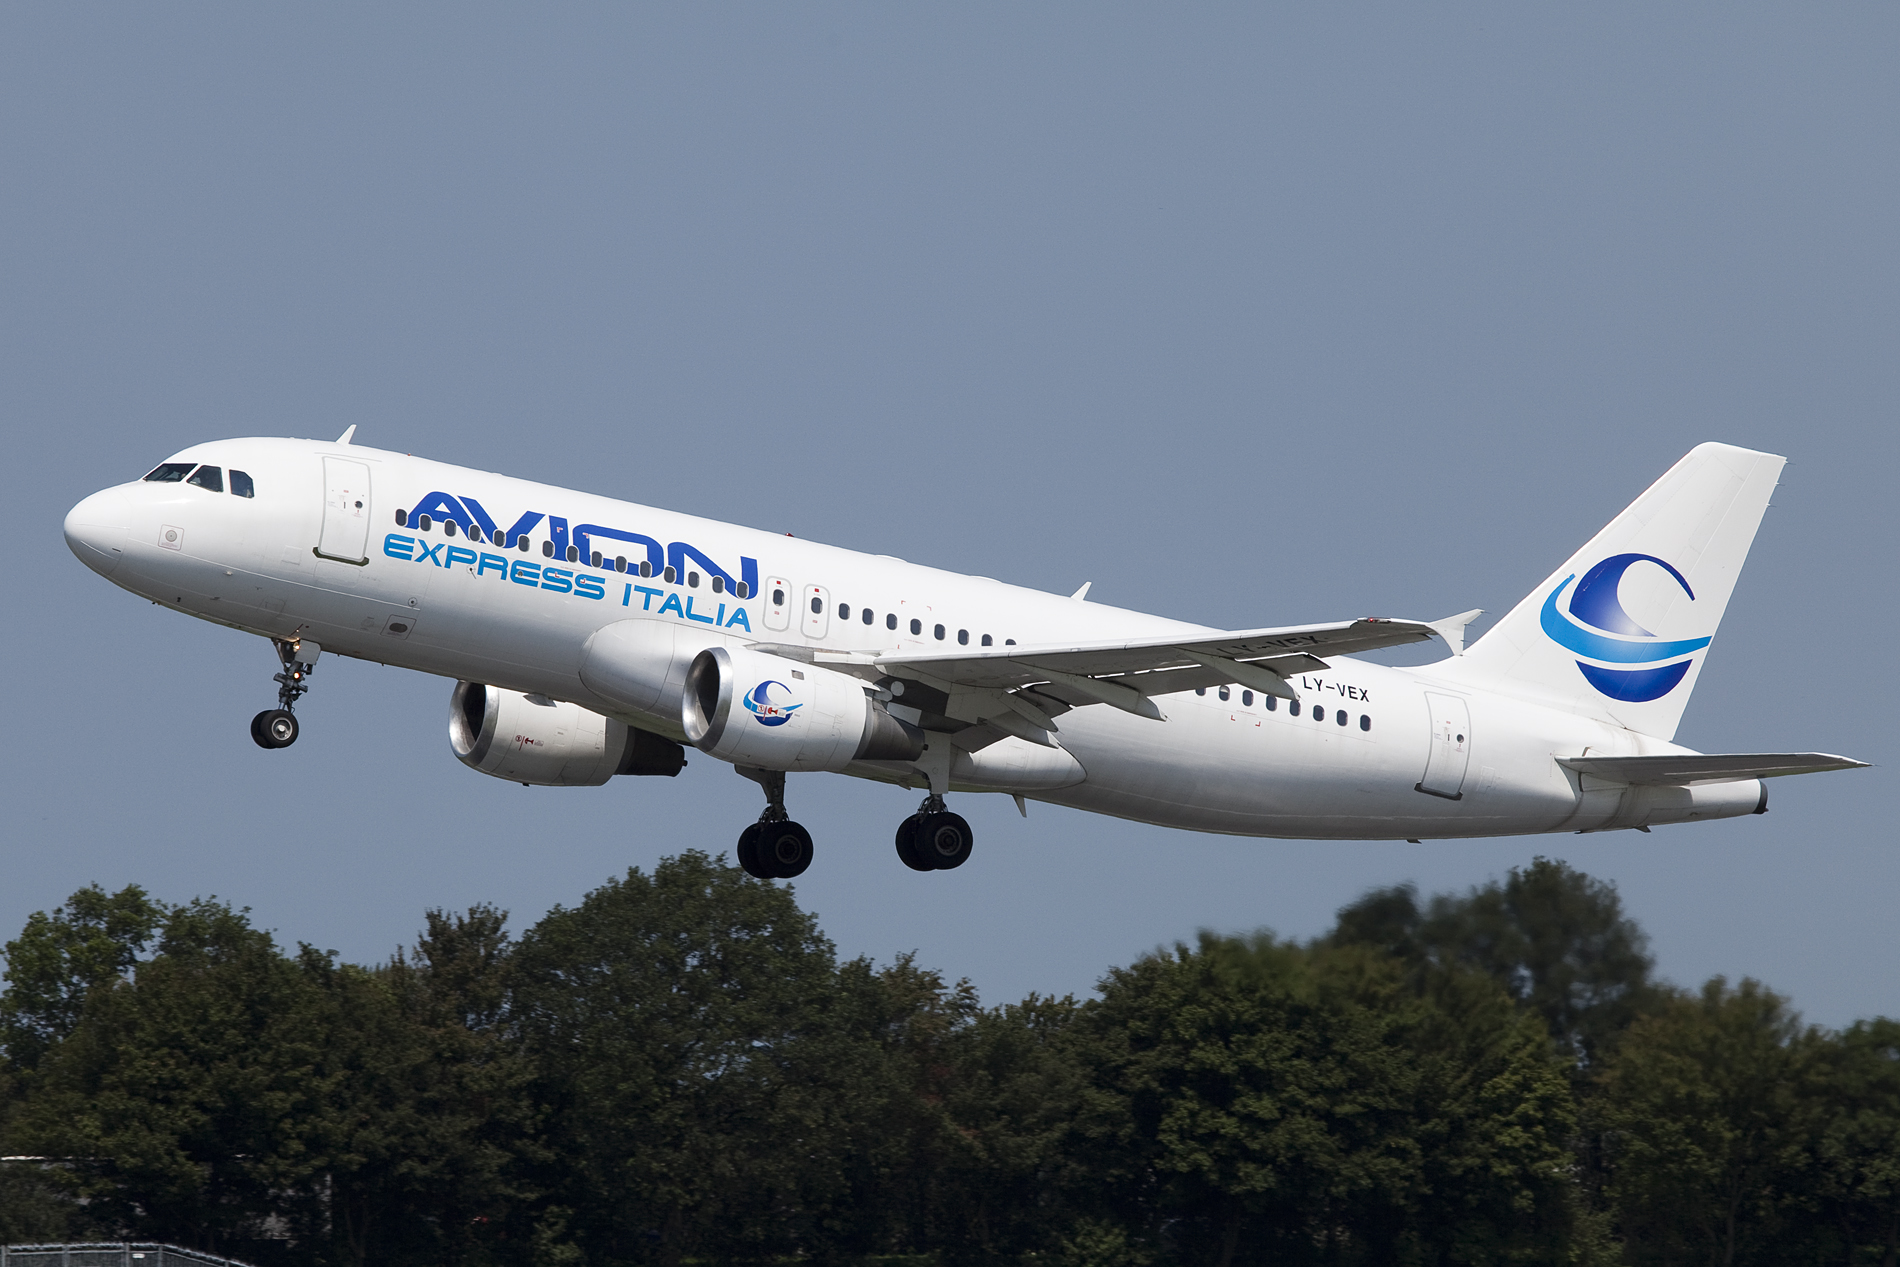 Sunexpress To Lease Five Airbus A320 From Avion Express